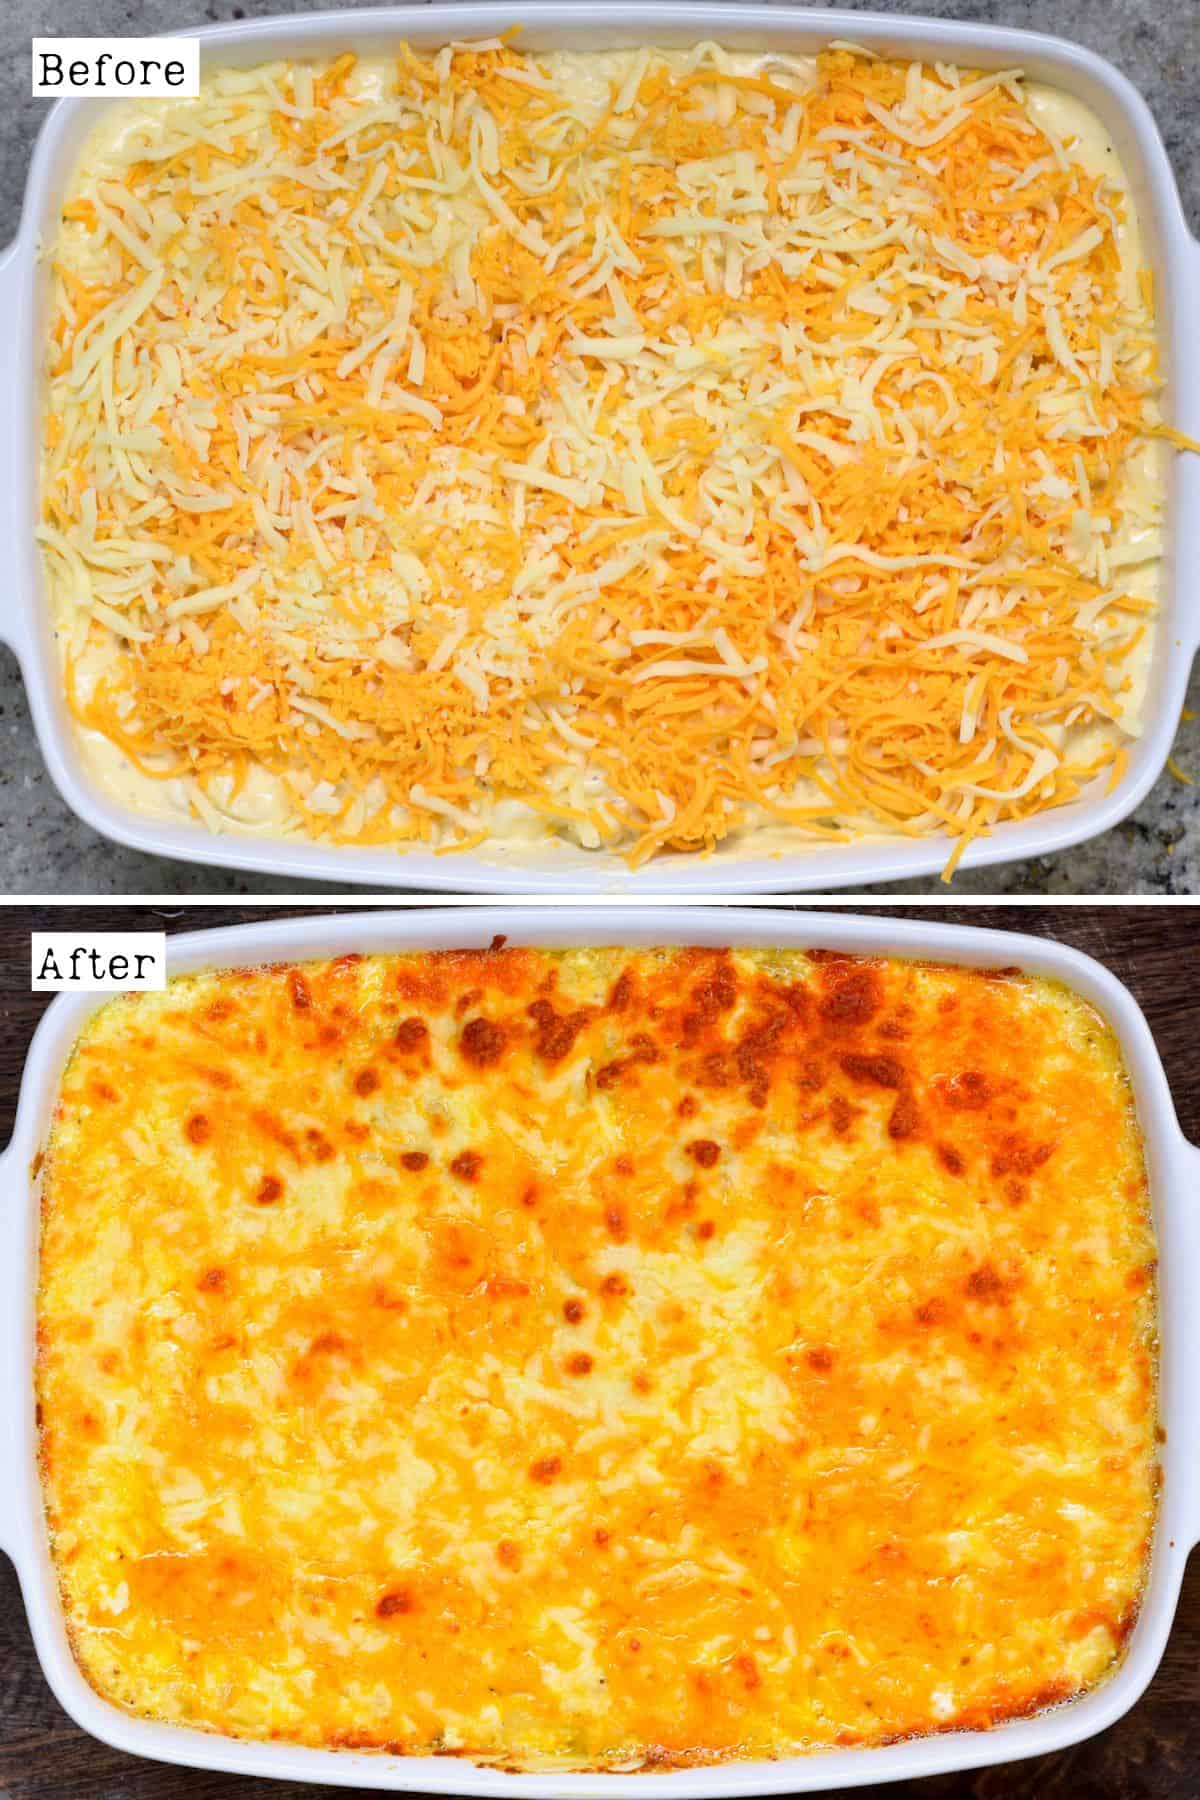 Before and after baking macaroni and cheese